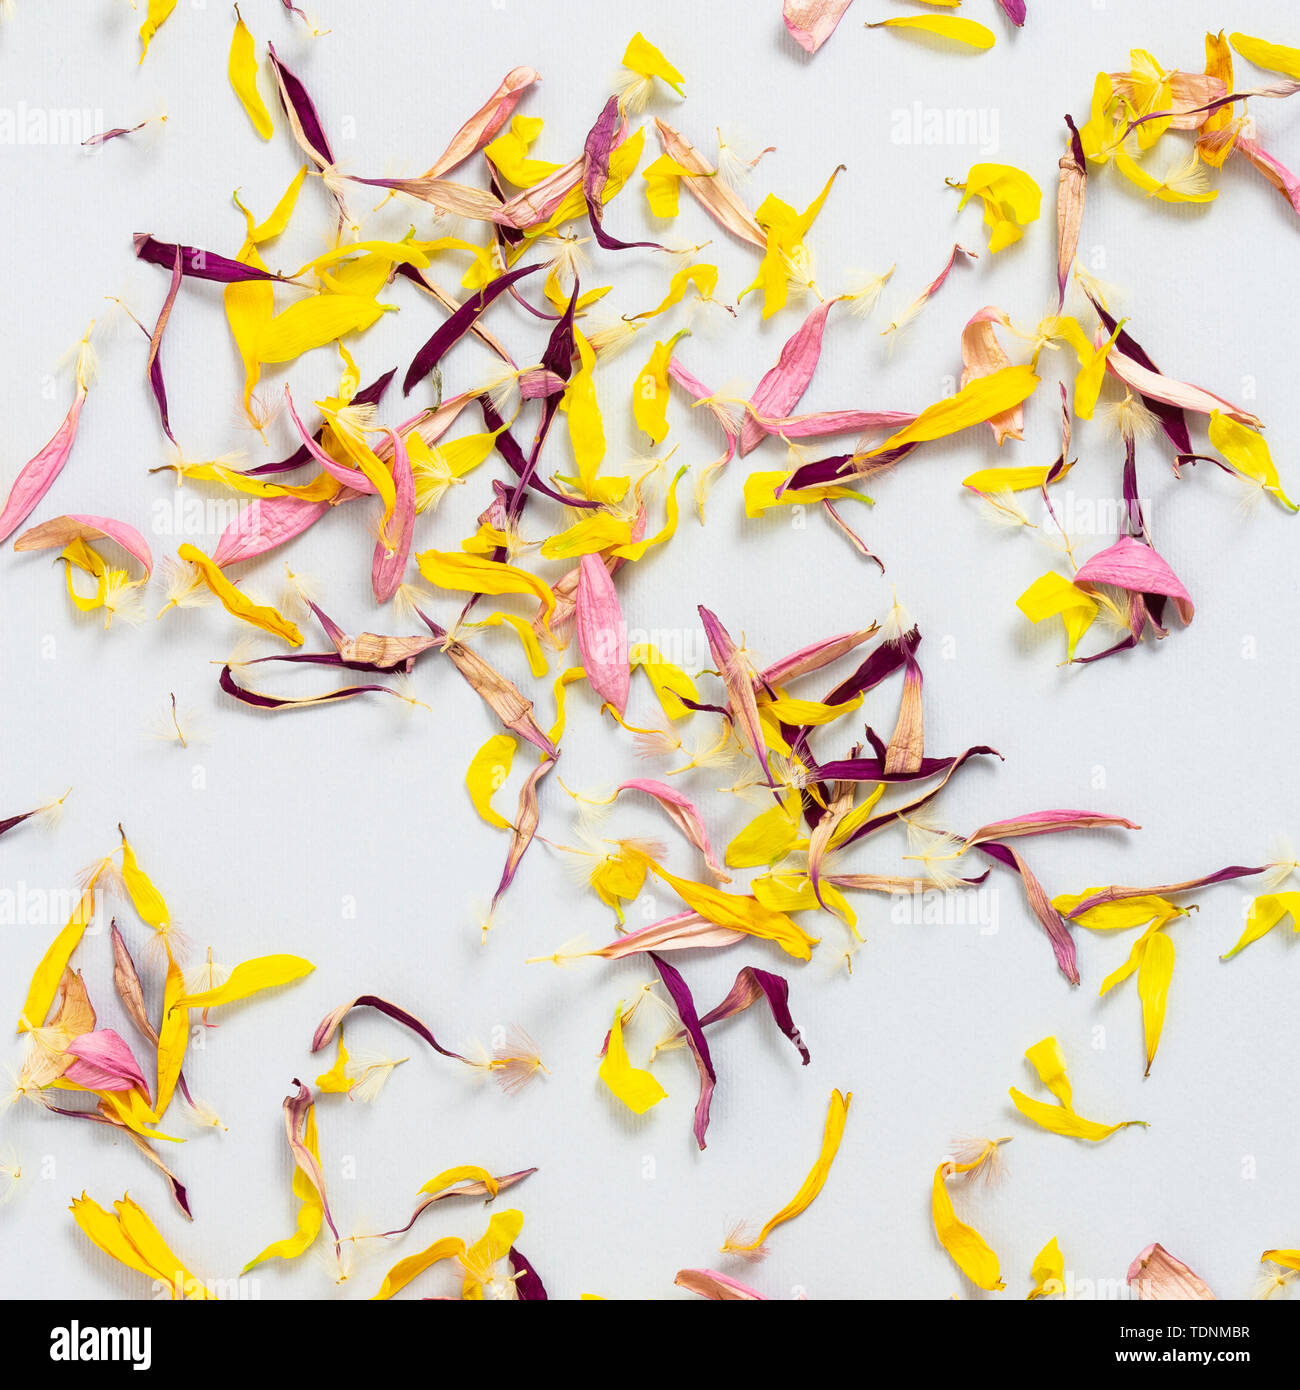 Dry multicolored flower petals scattered on a gray background Stock Photo